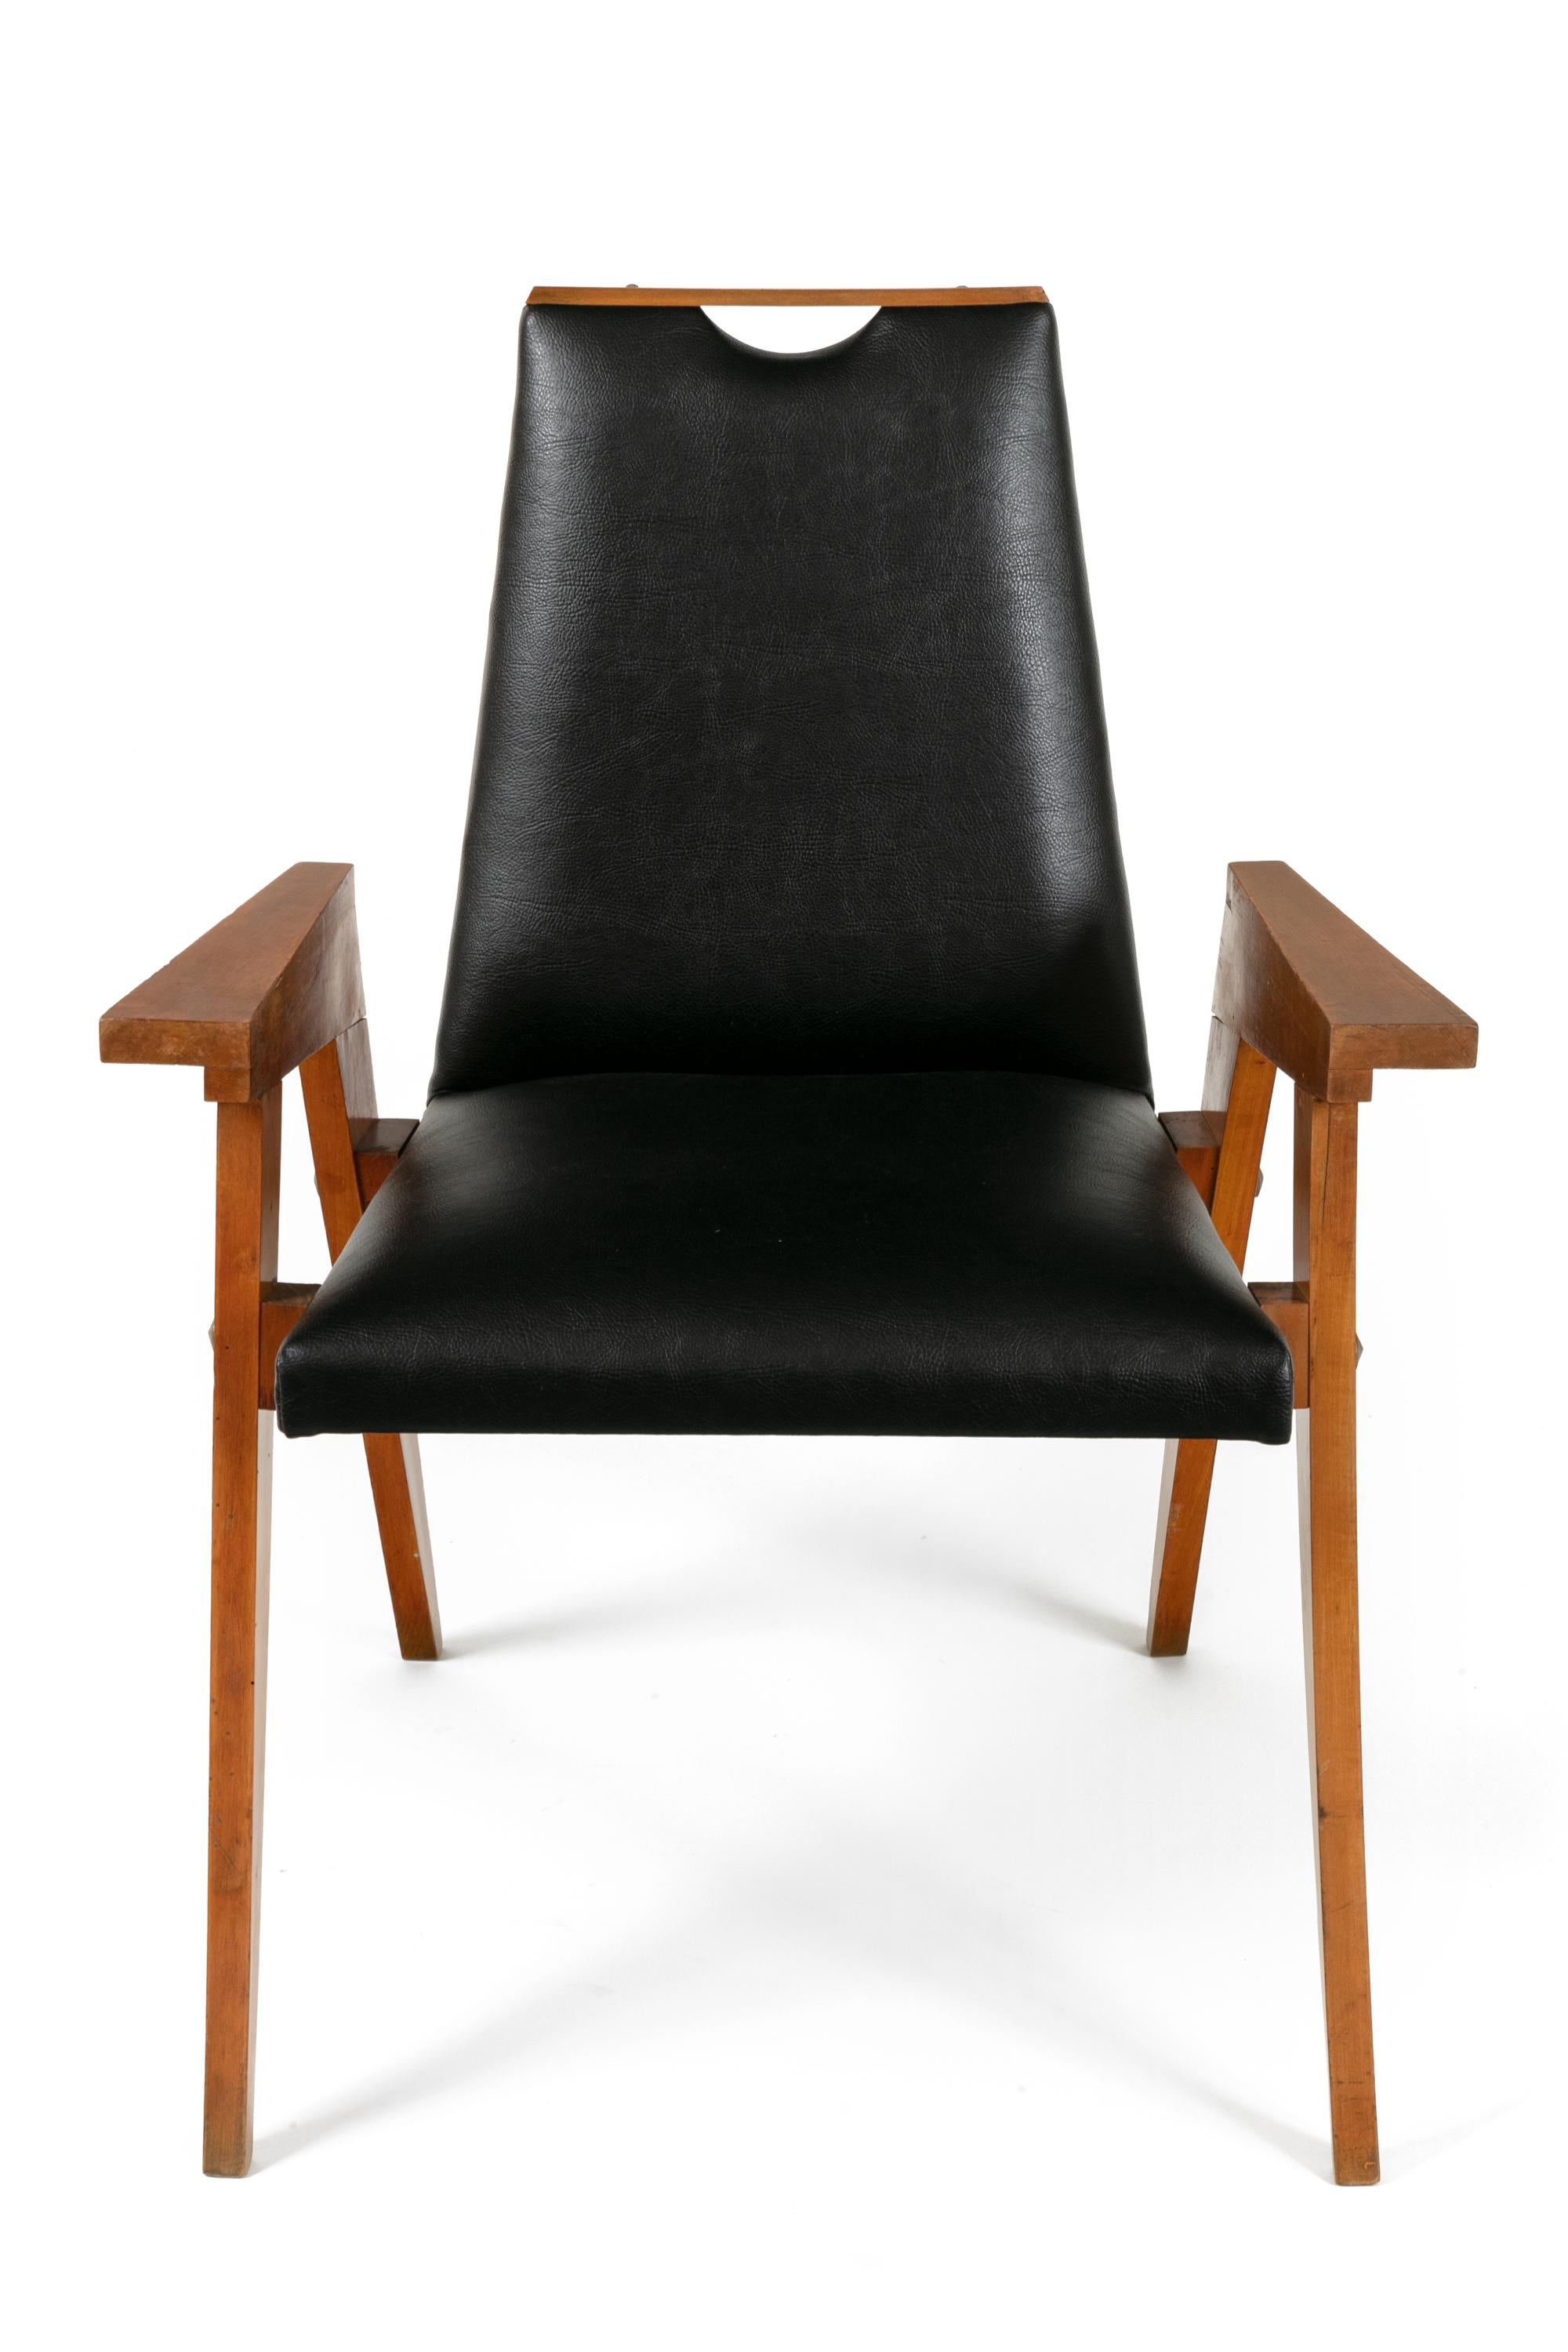 Mid-Century Modern Set of 8 Wood Framed Dining Chairs Upholstered in Black Leather, Italy 1960s